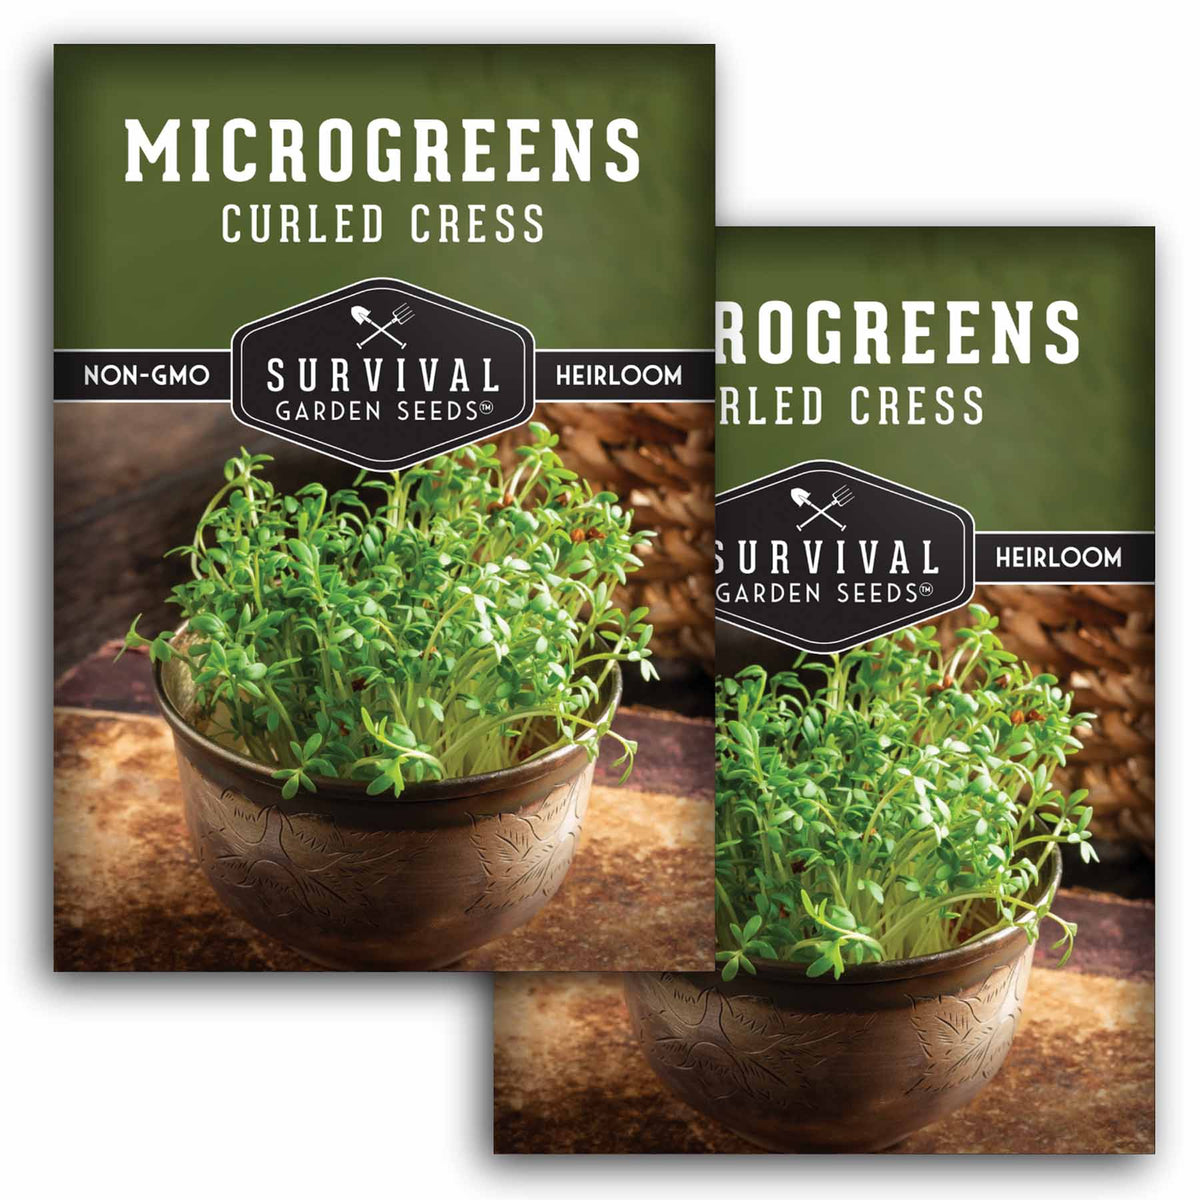 2 packs of Curled Cress Microgreens seeds